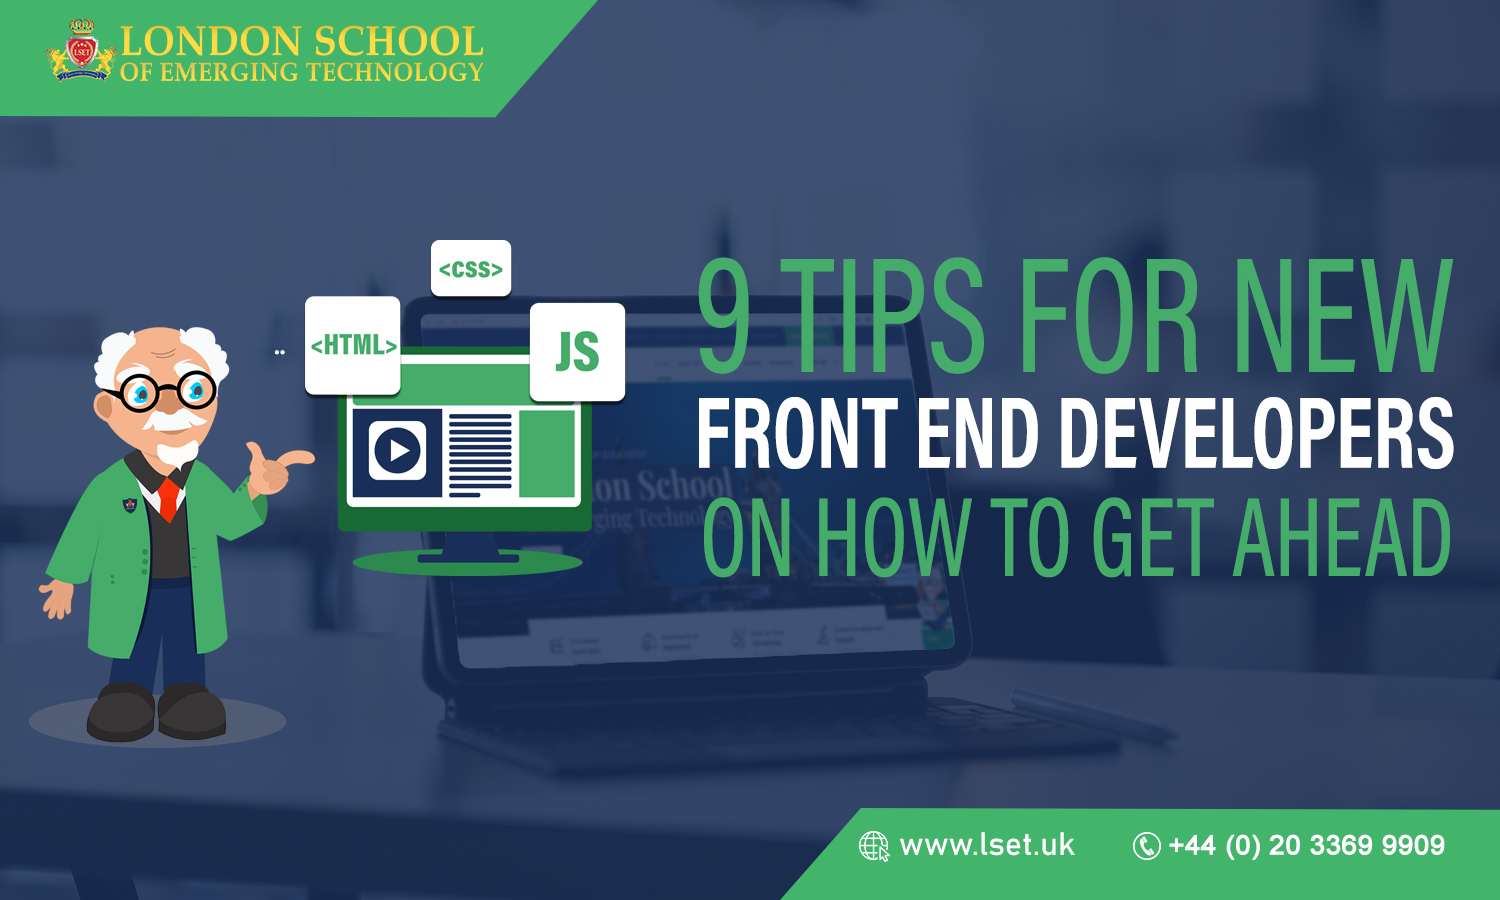 9 Tips for New Front End Developers on How to Get Ahead